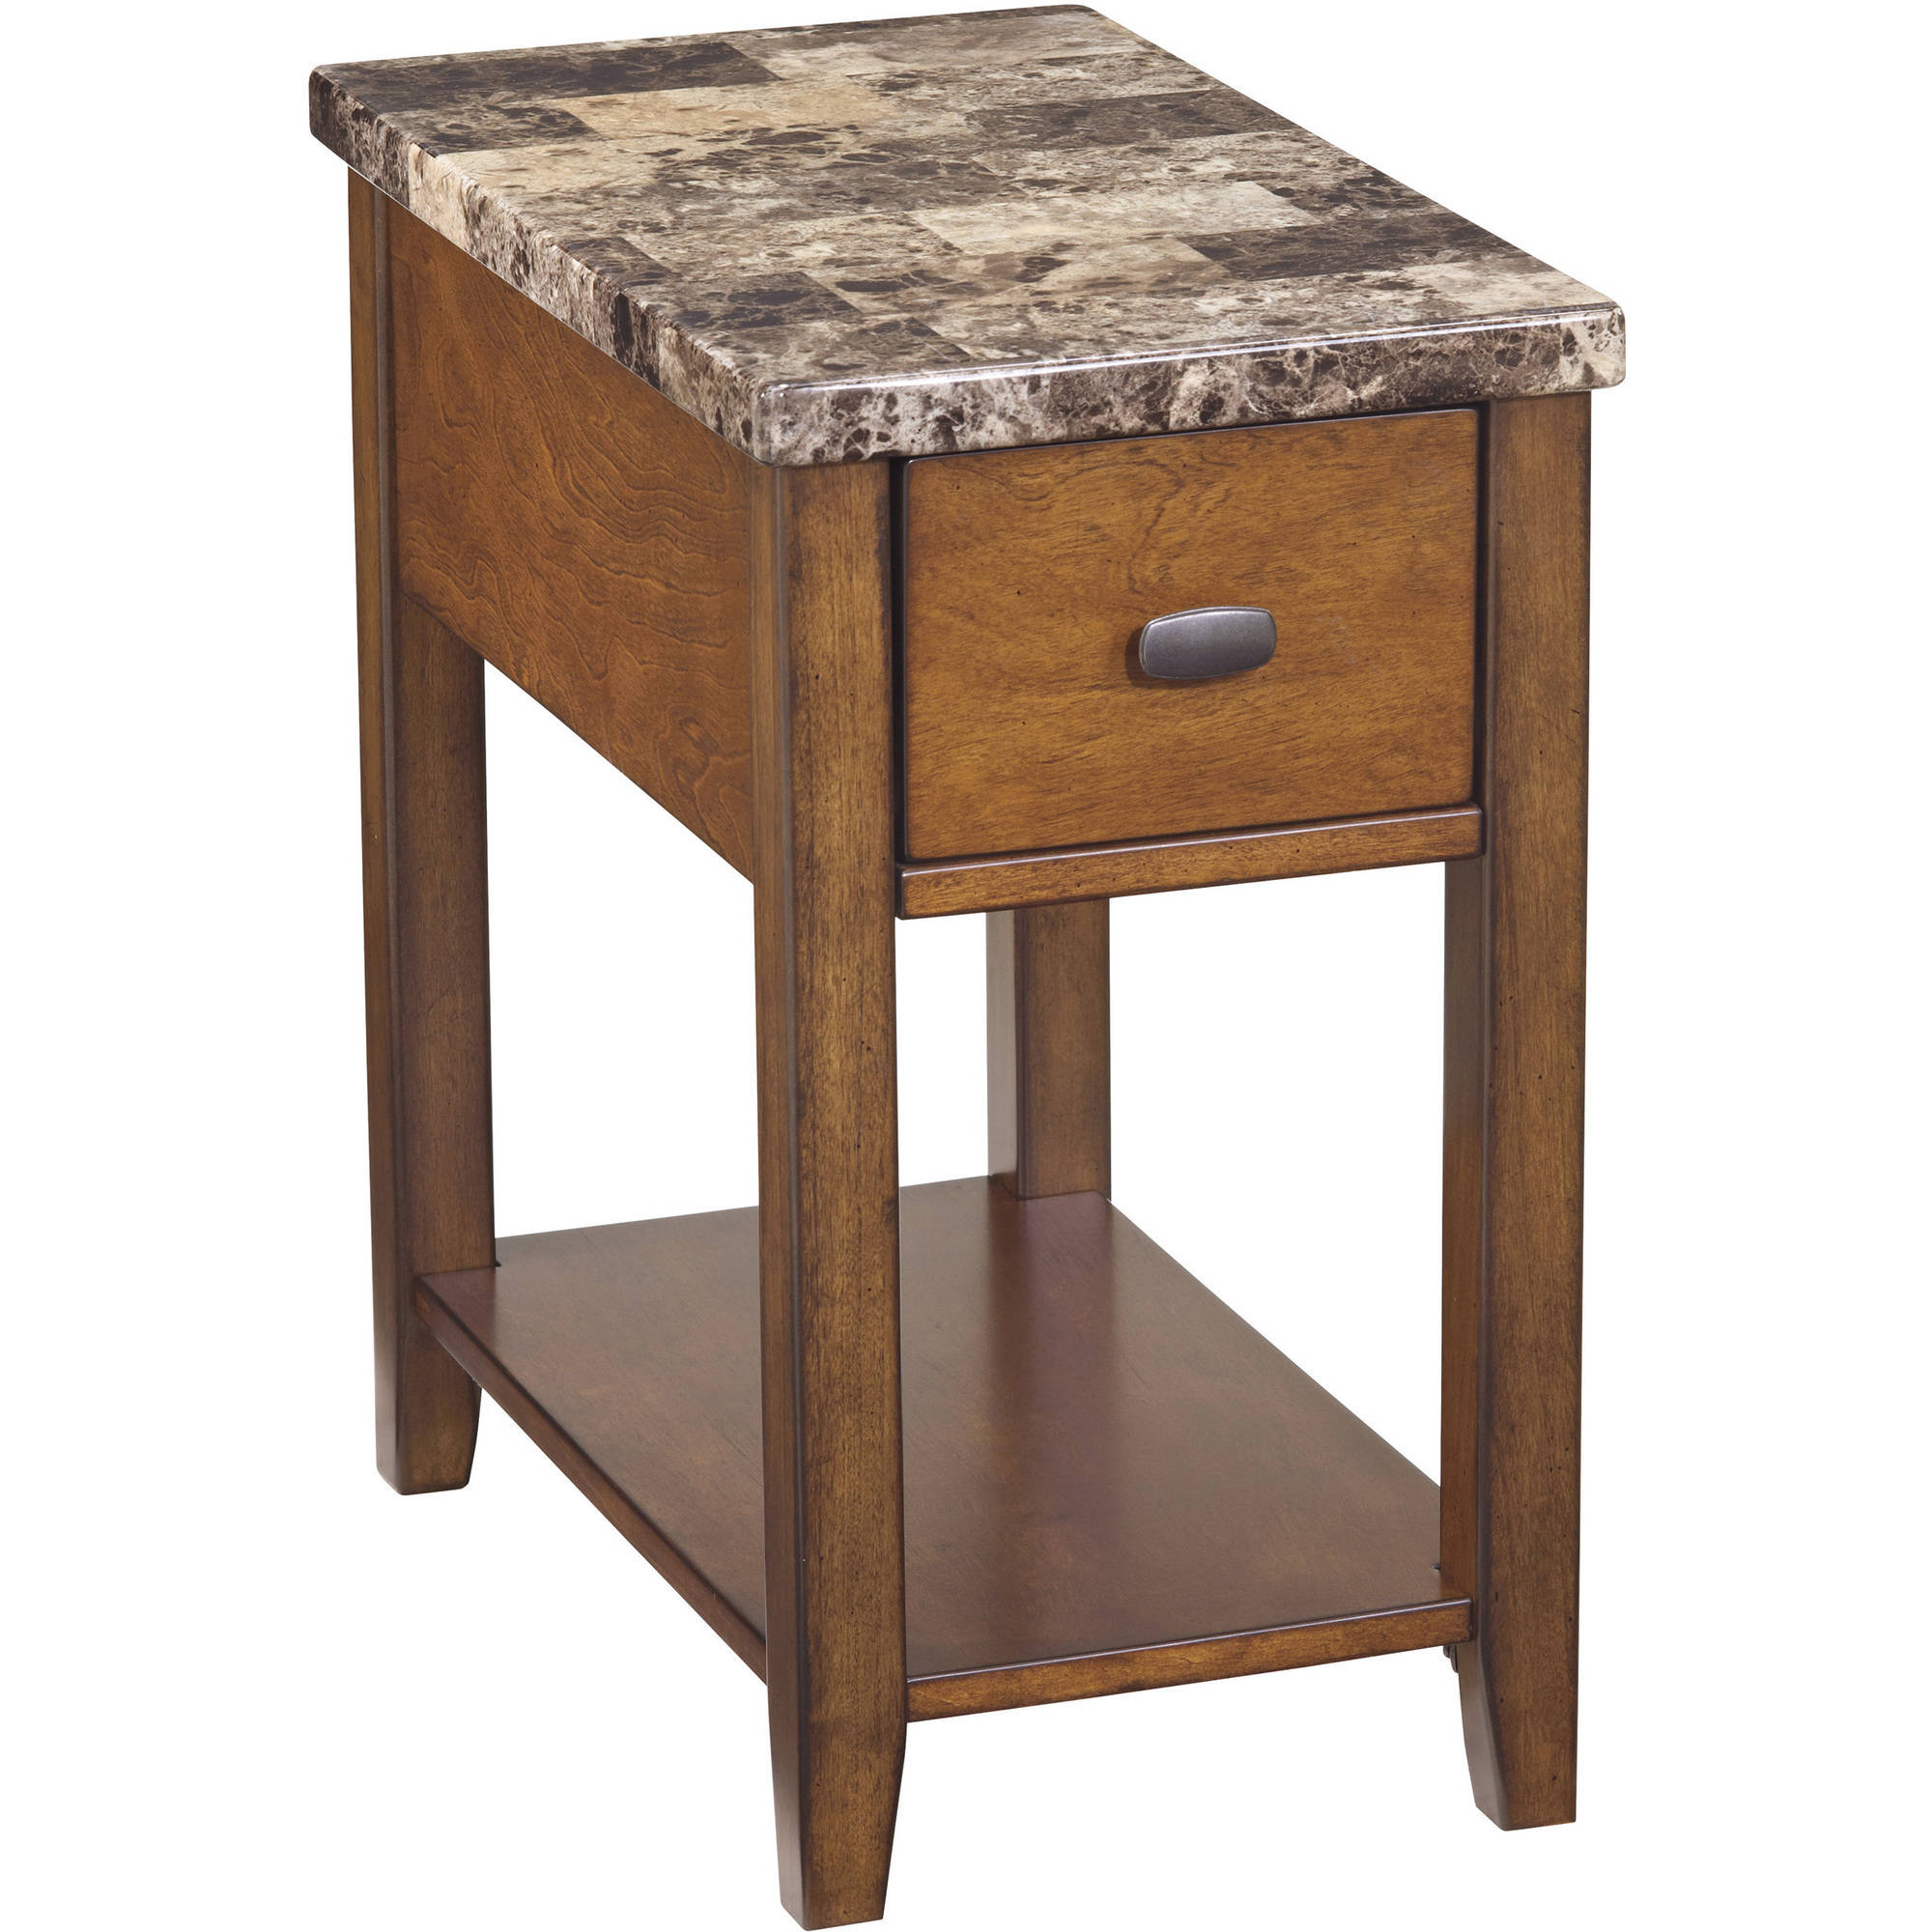 leick end tables target patio storage accent table unusual chairs unique home decor long mirror marble top dining drummer stool adjustable height gold contemporary lighting floor